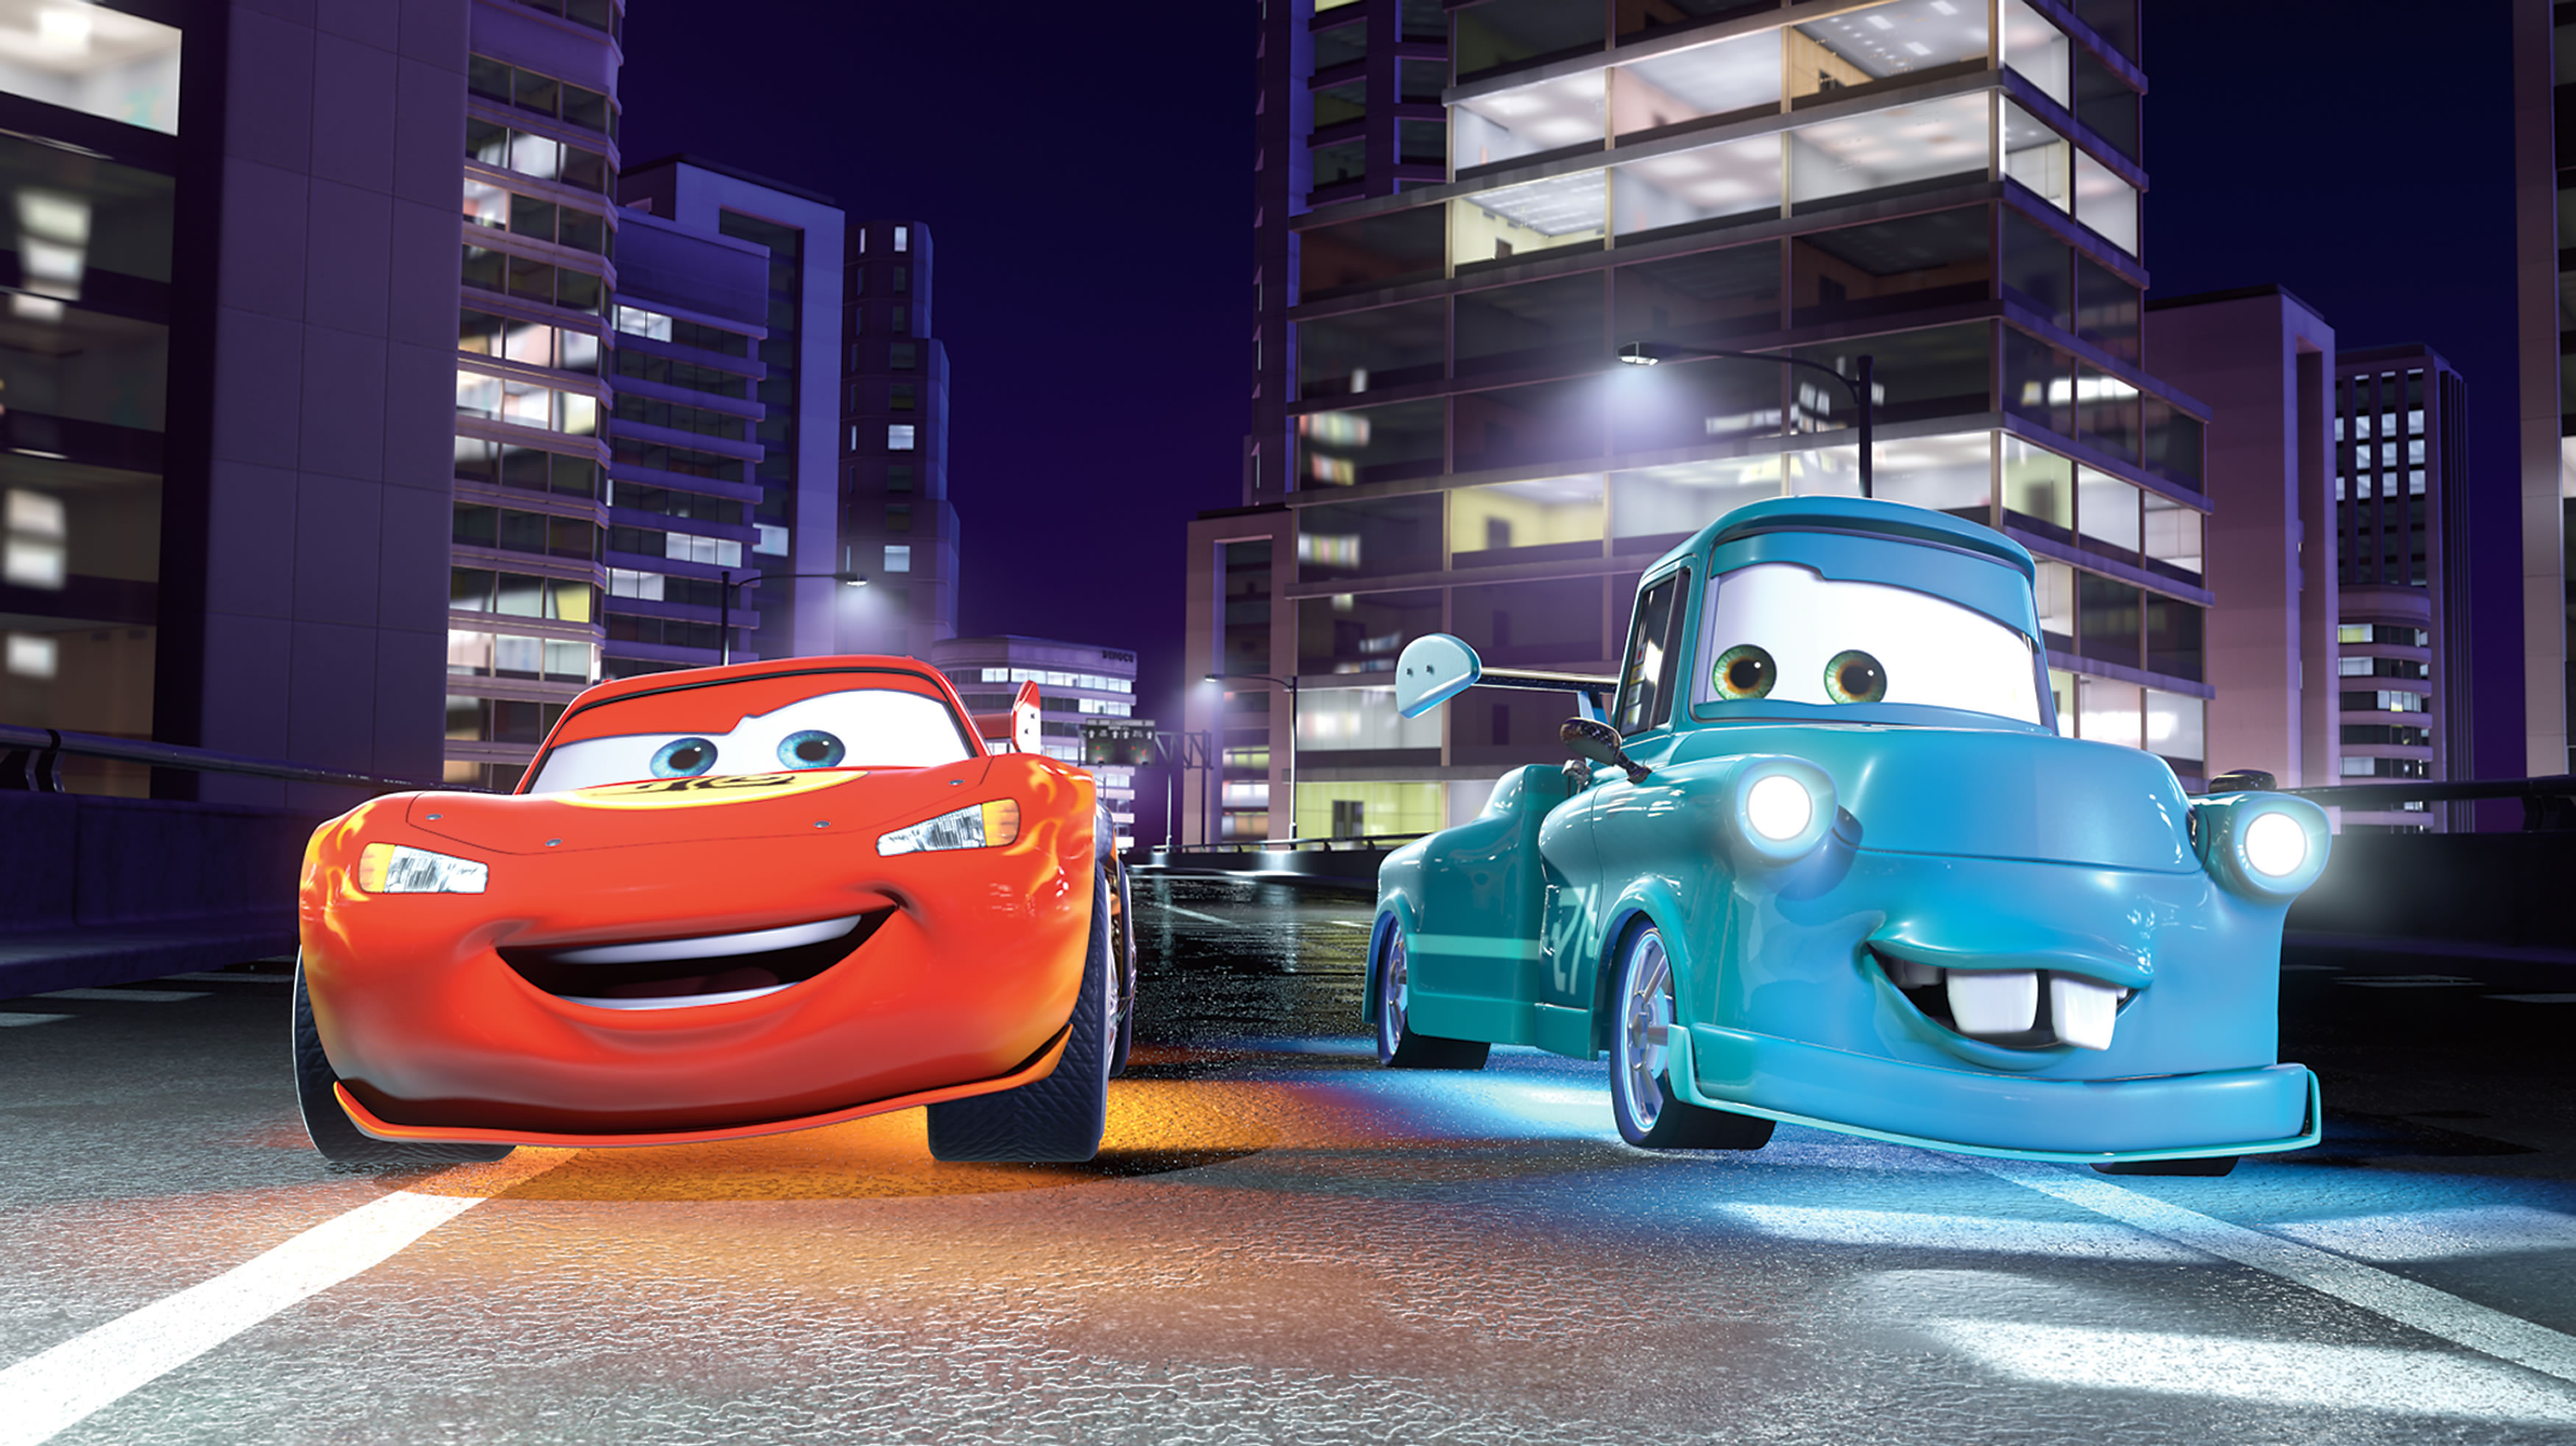 3500x1964 Cars Toons: Mater's Tall Tales HD Wallpapers and Backgrounds